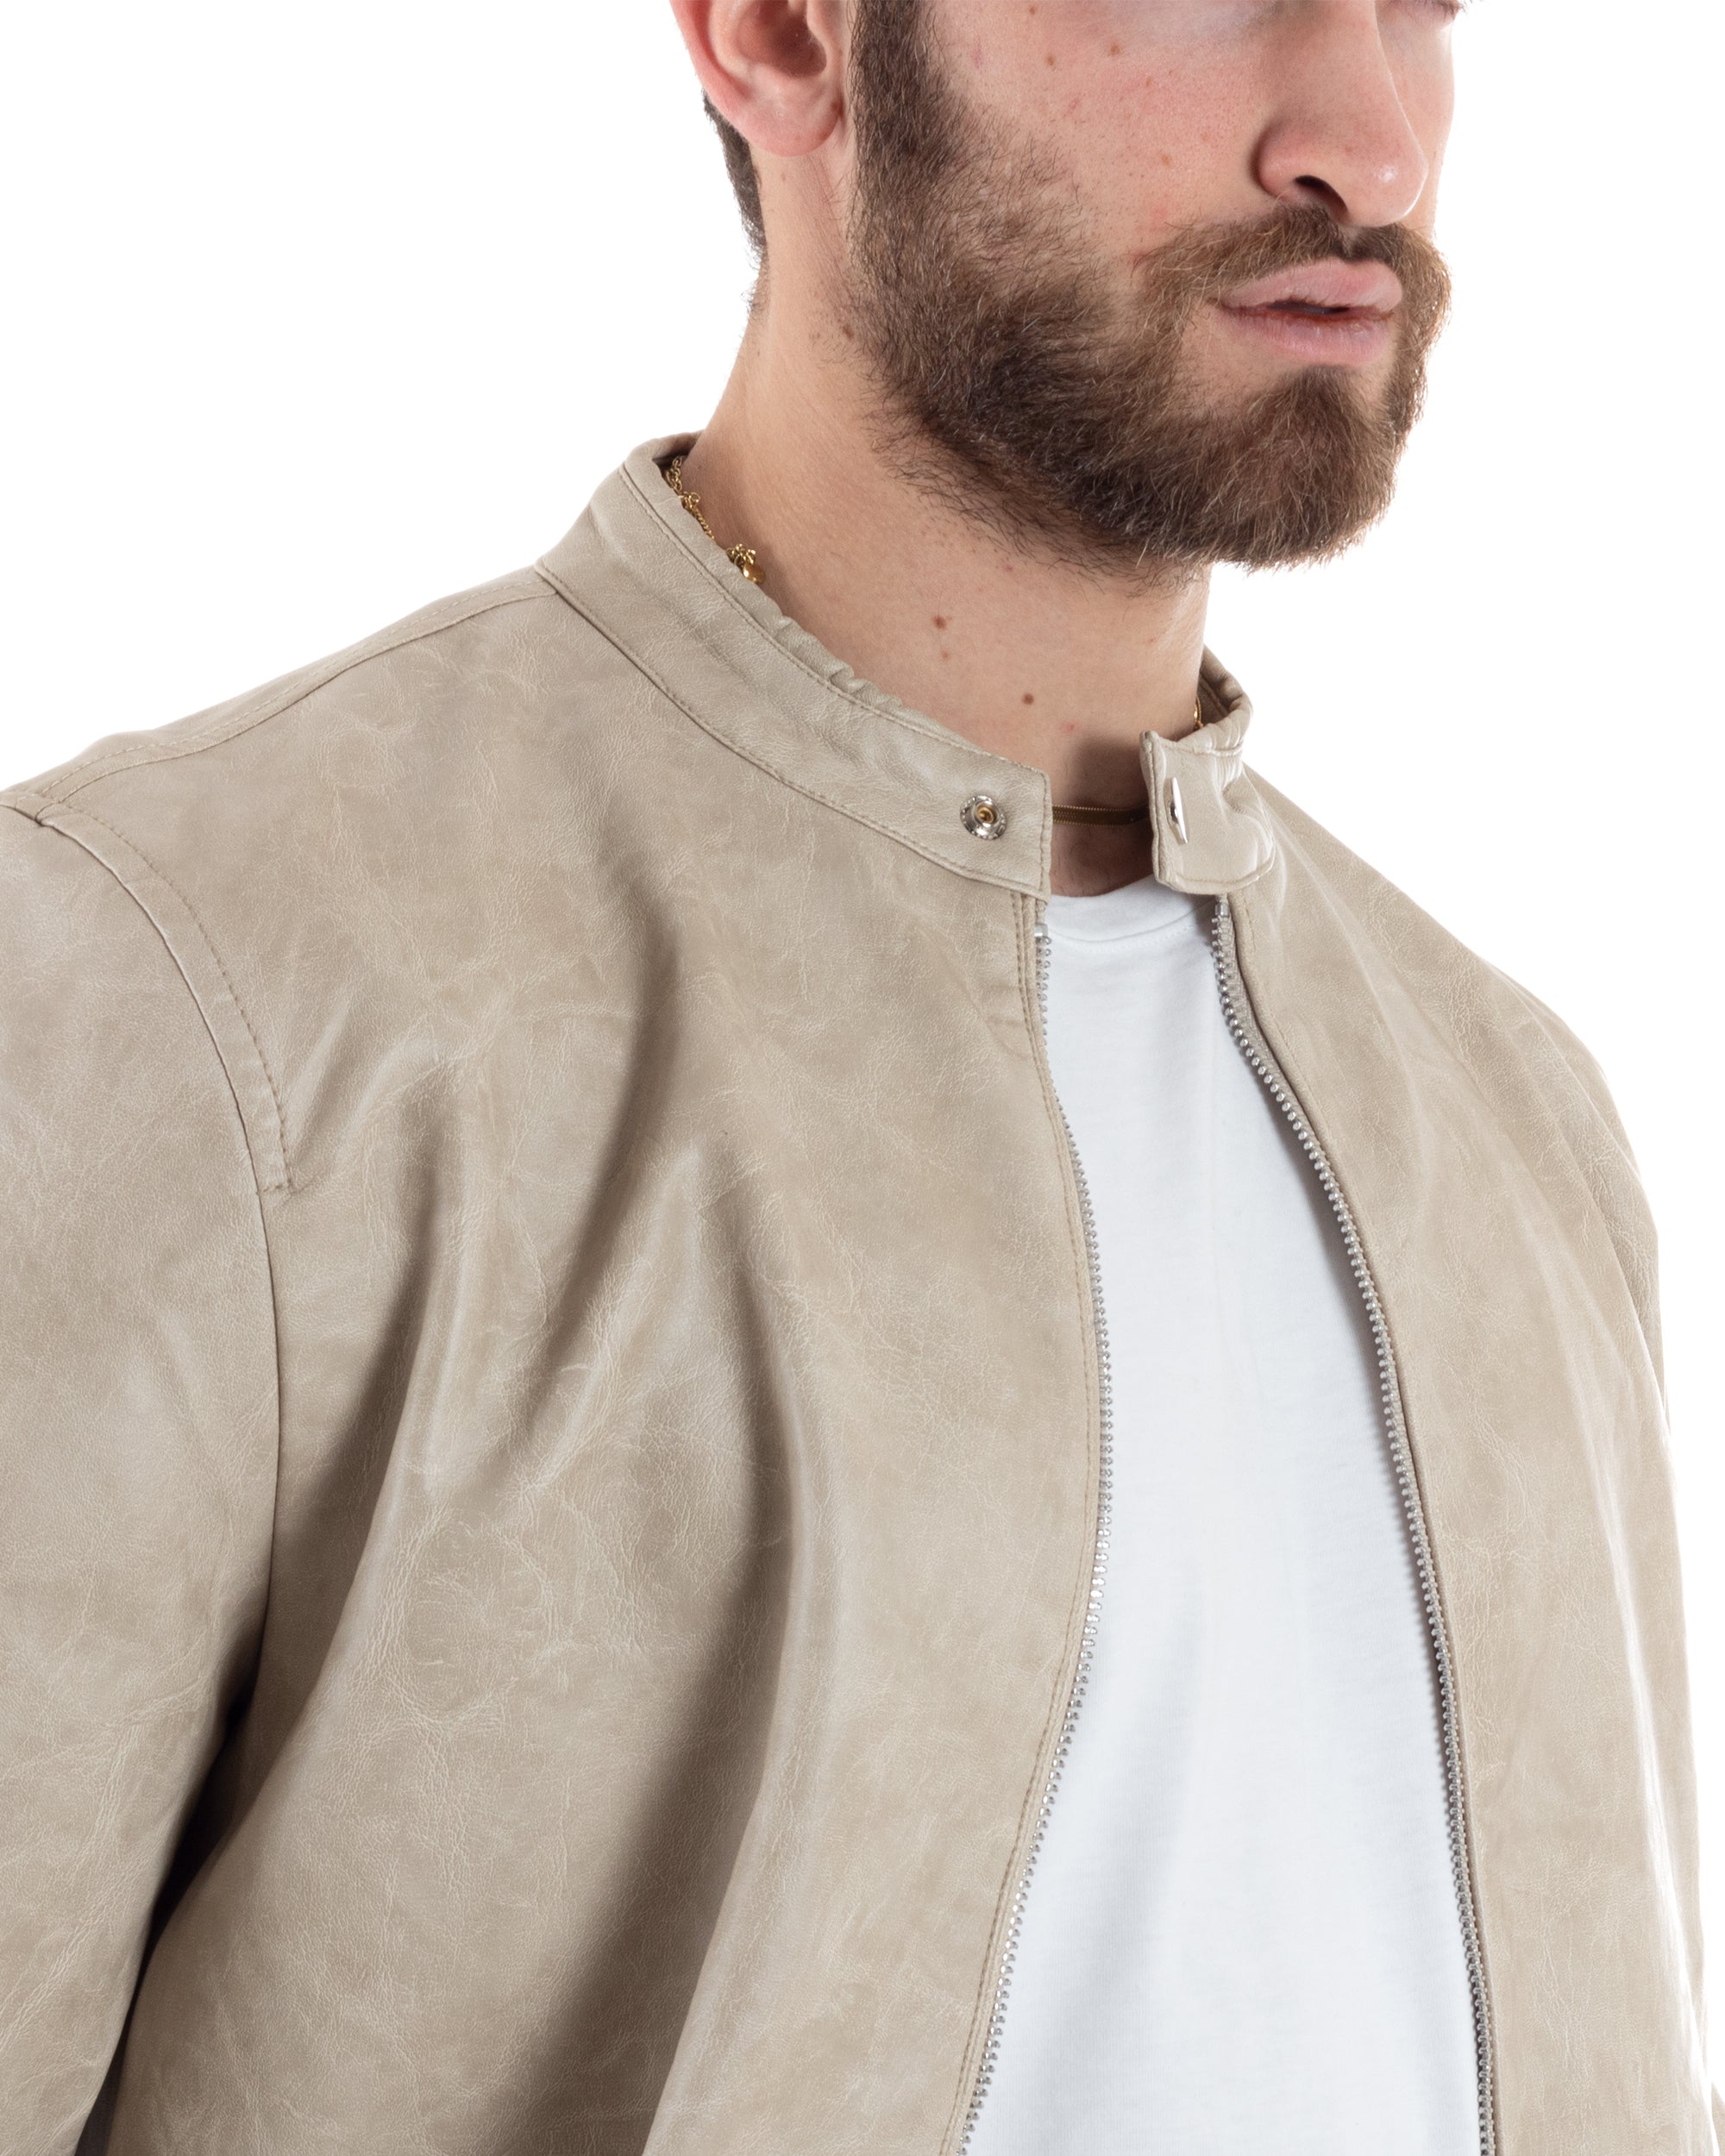 Men's Jacket Suede Bomber Jacket With Buttons Flap Pockets Beige Casual GIOSAL-G3088A